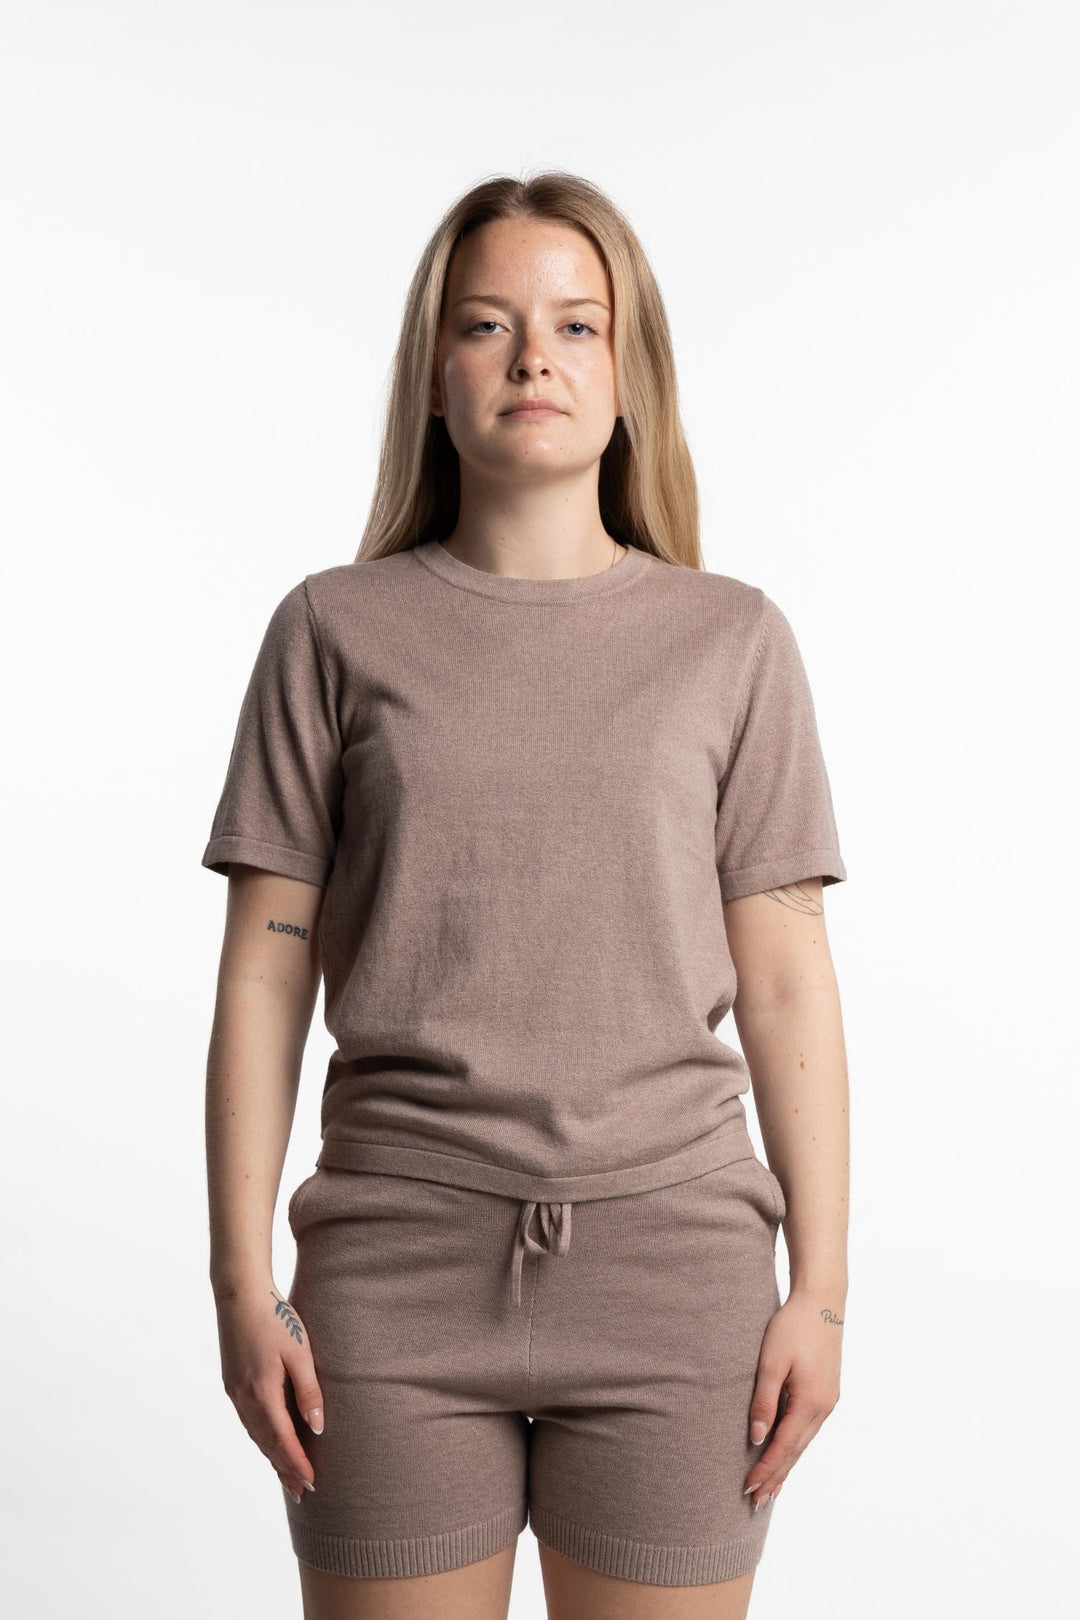 Cleo Cotton Cashmere T-shirt - Taupe Brown